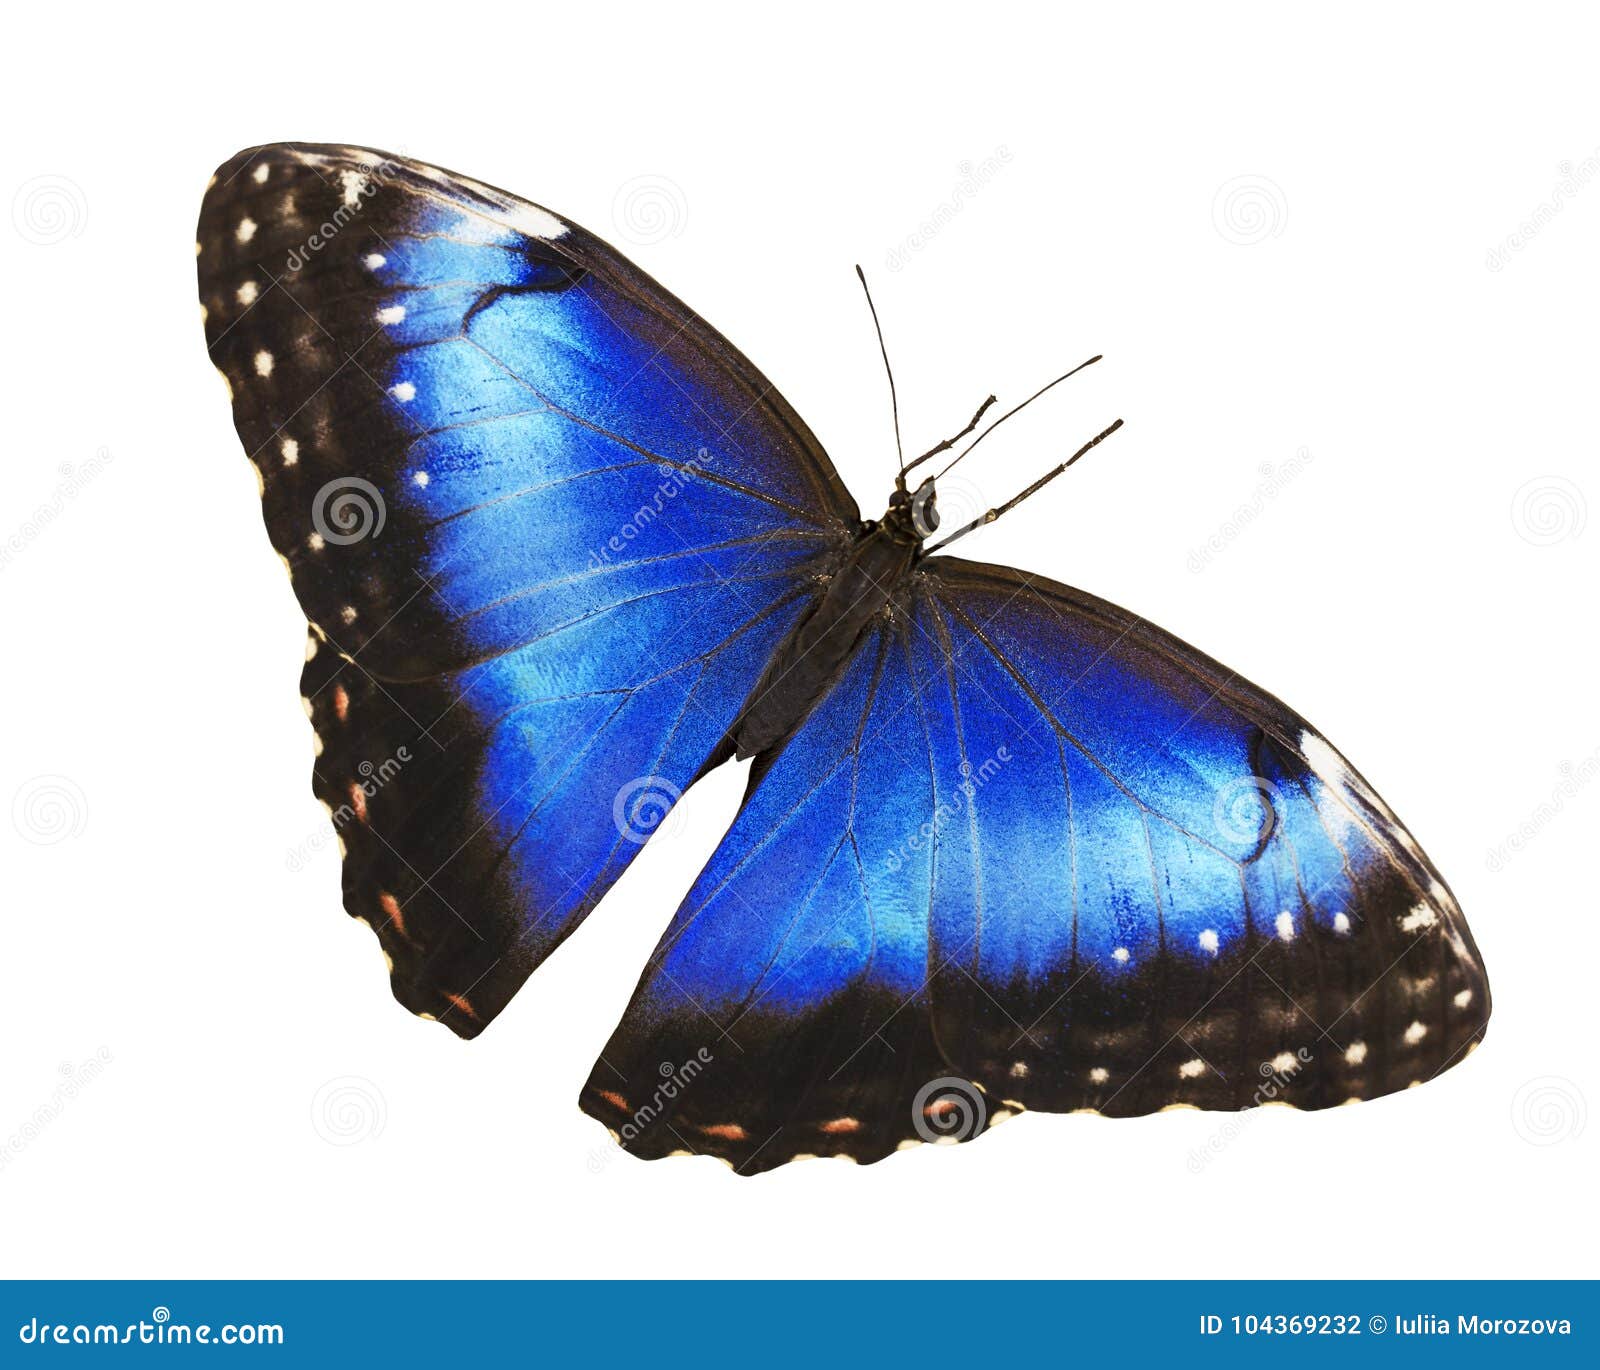 bright blue morpho butterfly  on white background with spread wings